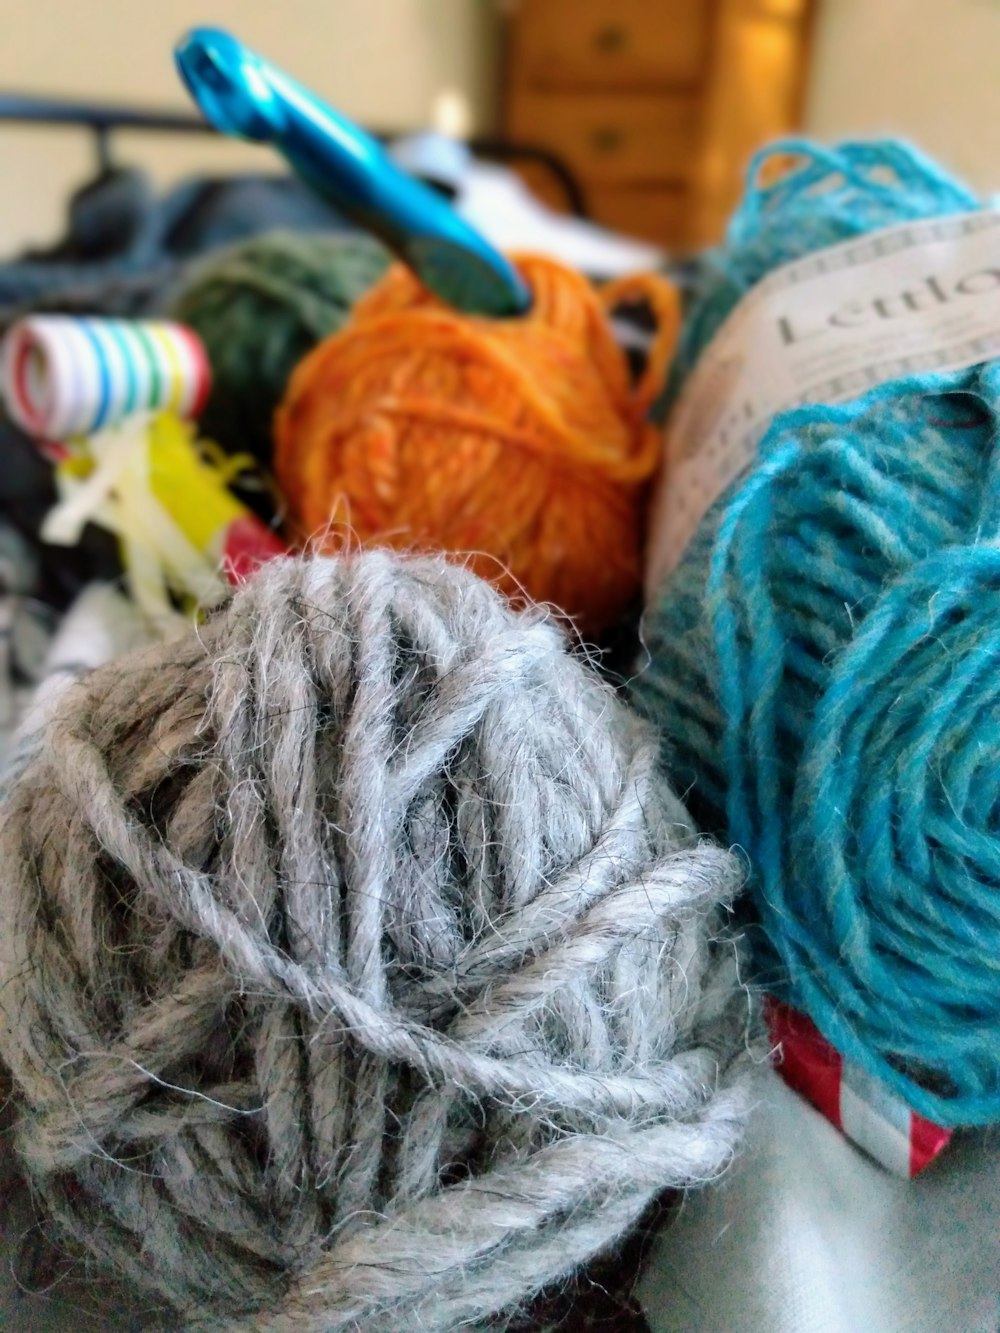 a close up of some yarn